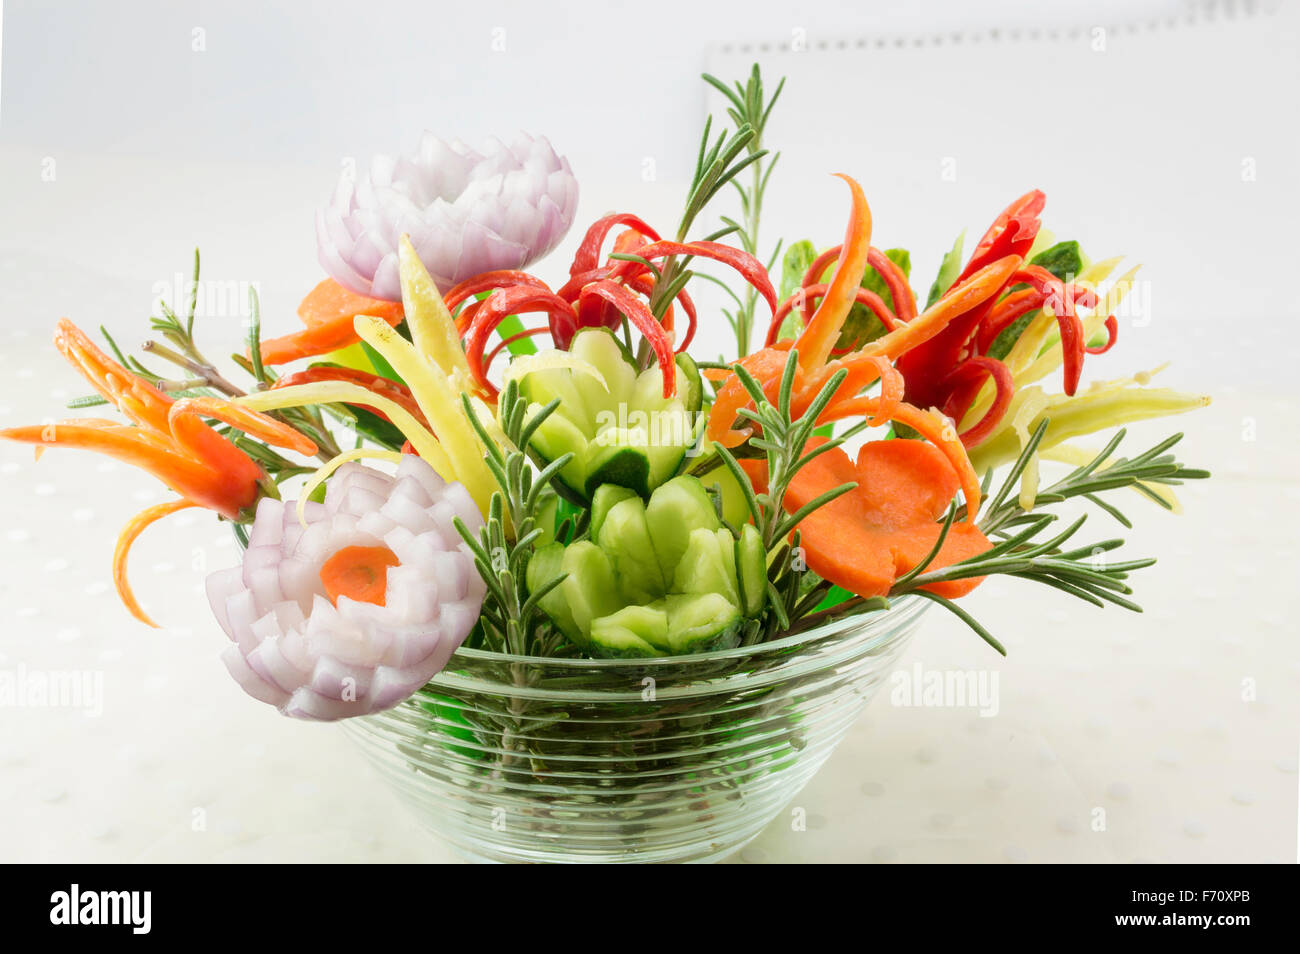 Homemade unique flower shaped vegetables salad served in a bowl Stock Photo